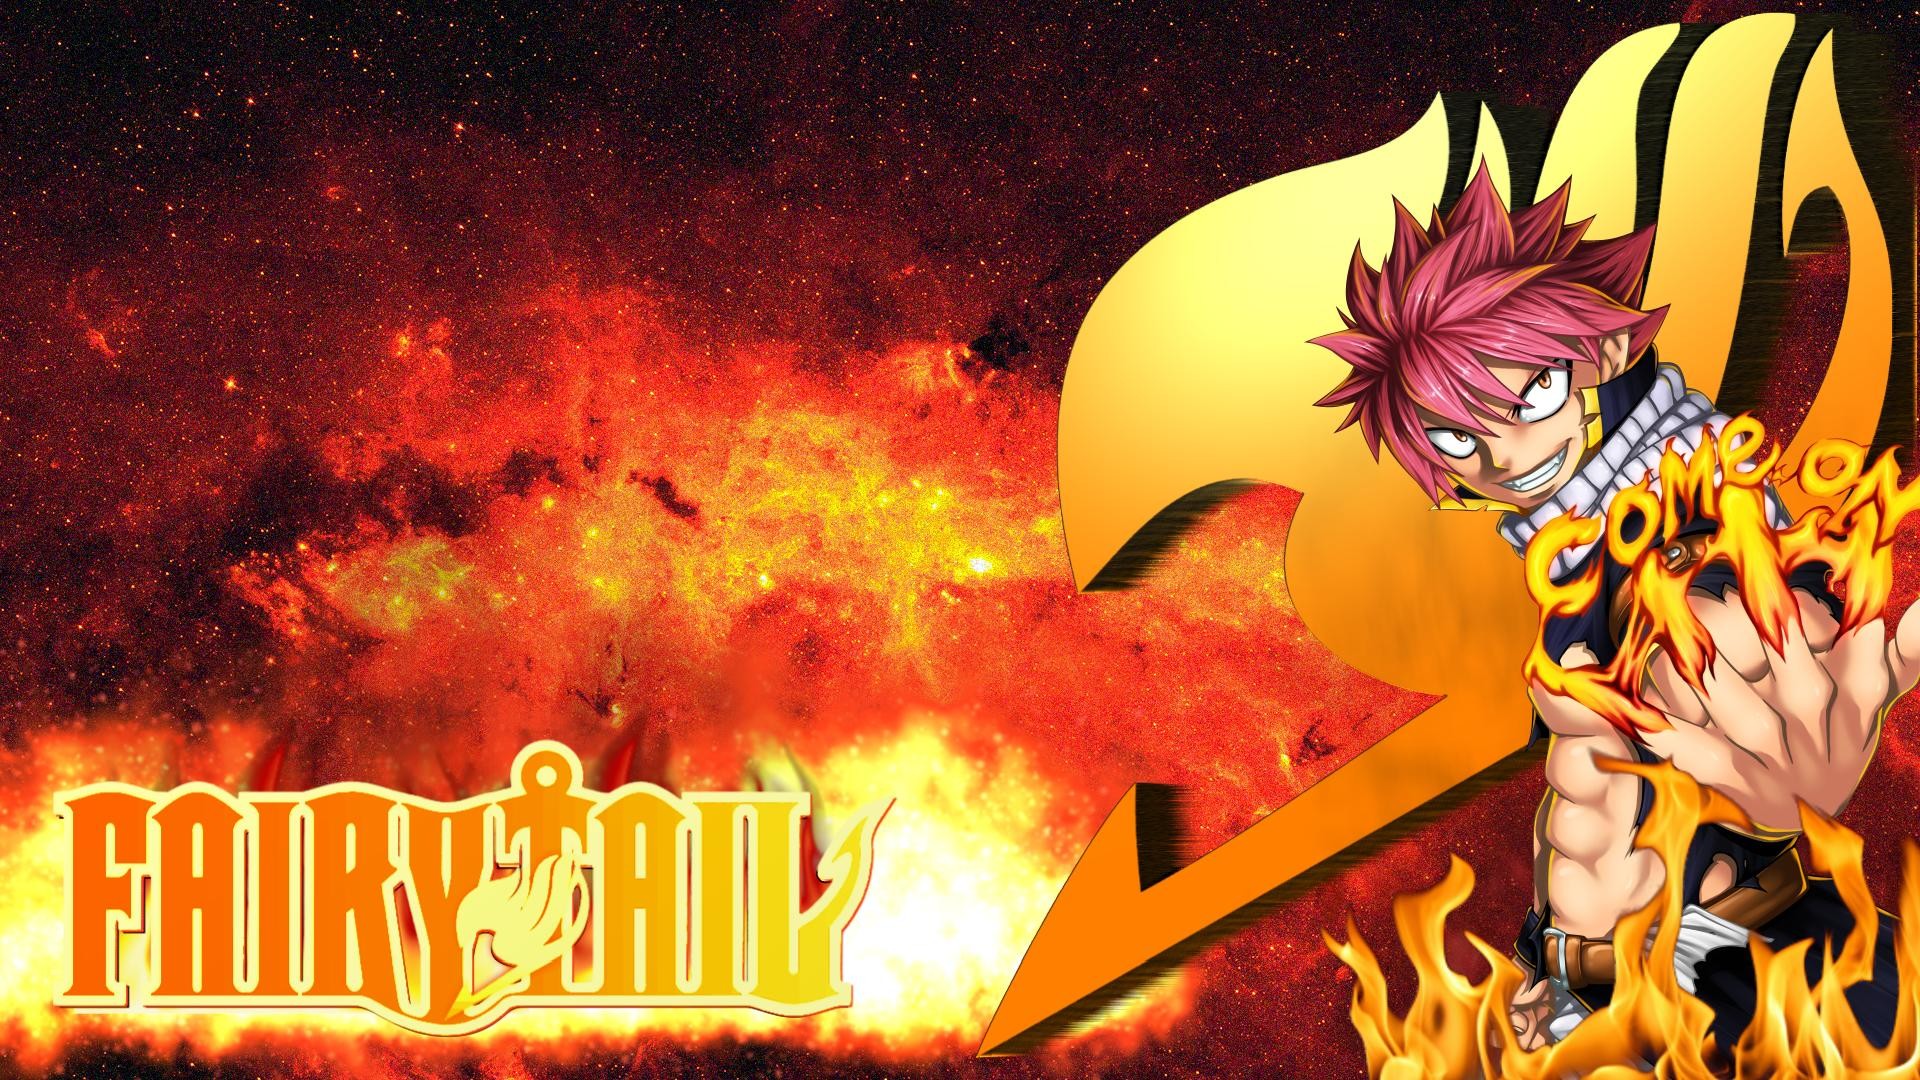 Wallpaper Hp Android Fairy Tail